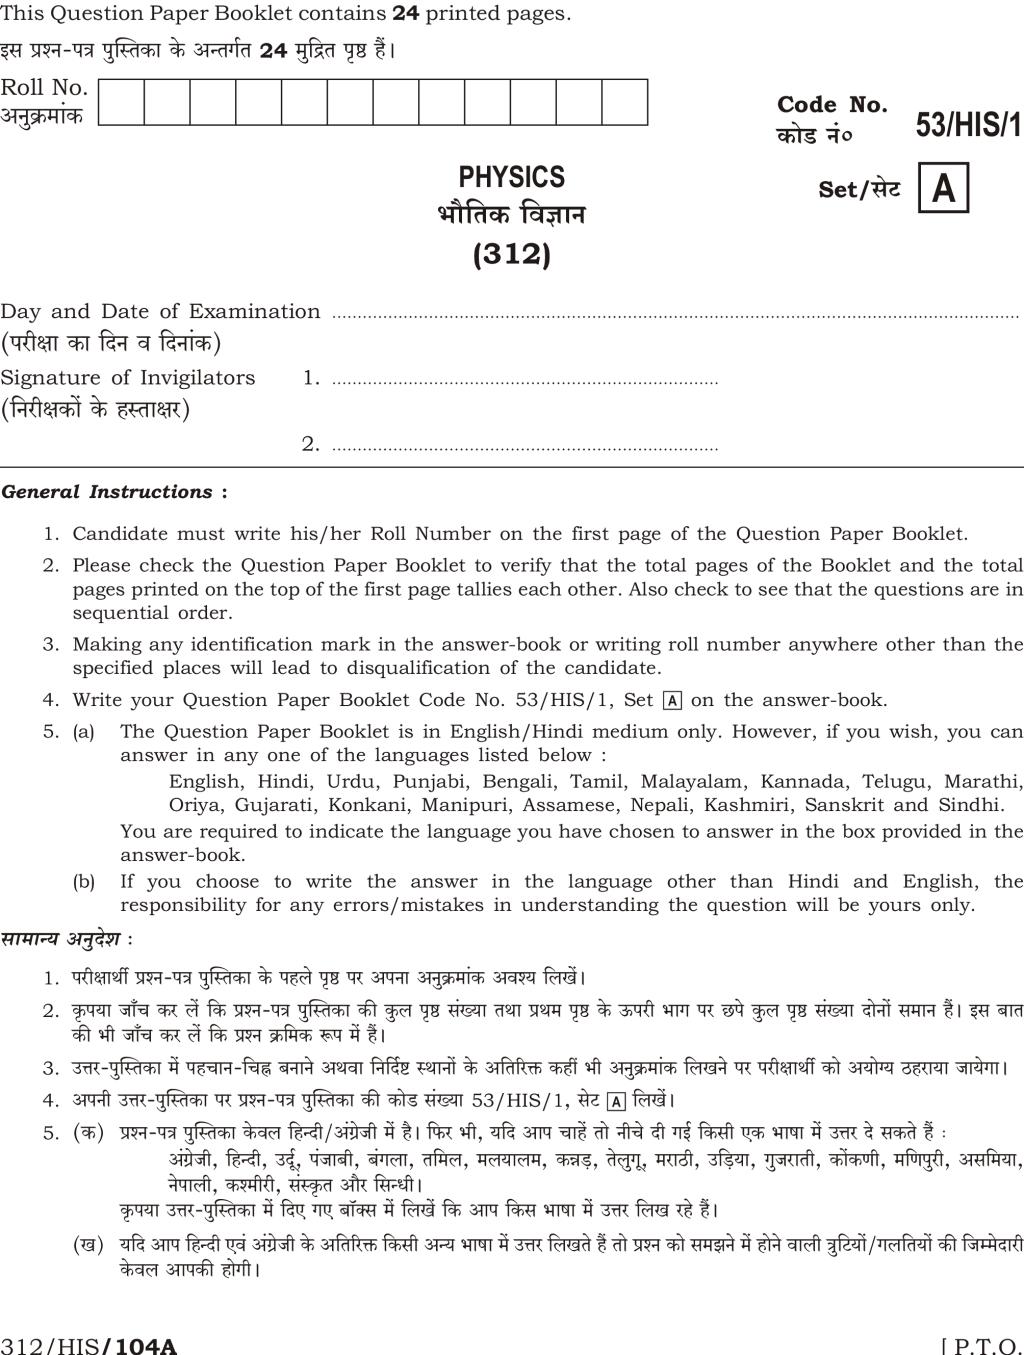 NIOS Class 12 Question Paper Oct 2016 - Physics - Page 1